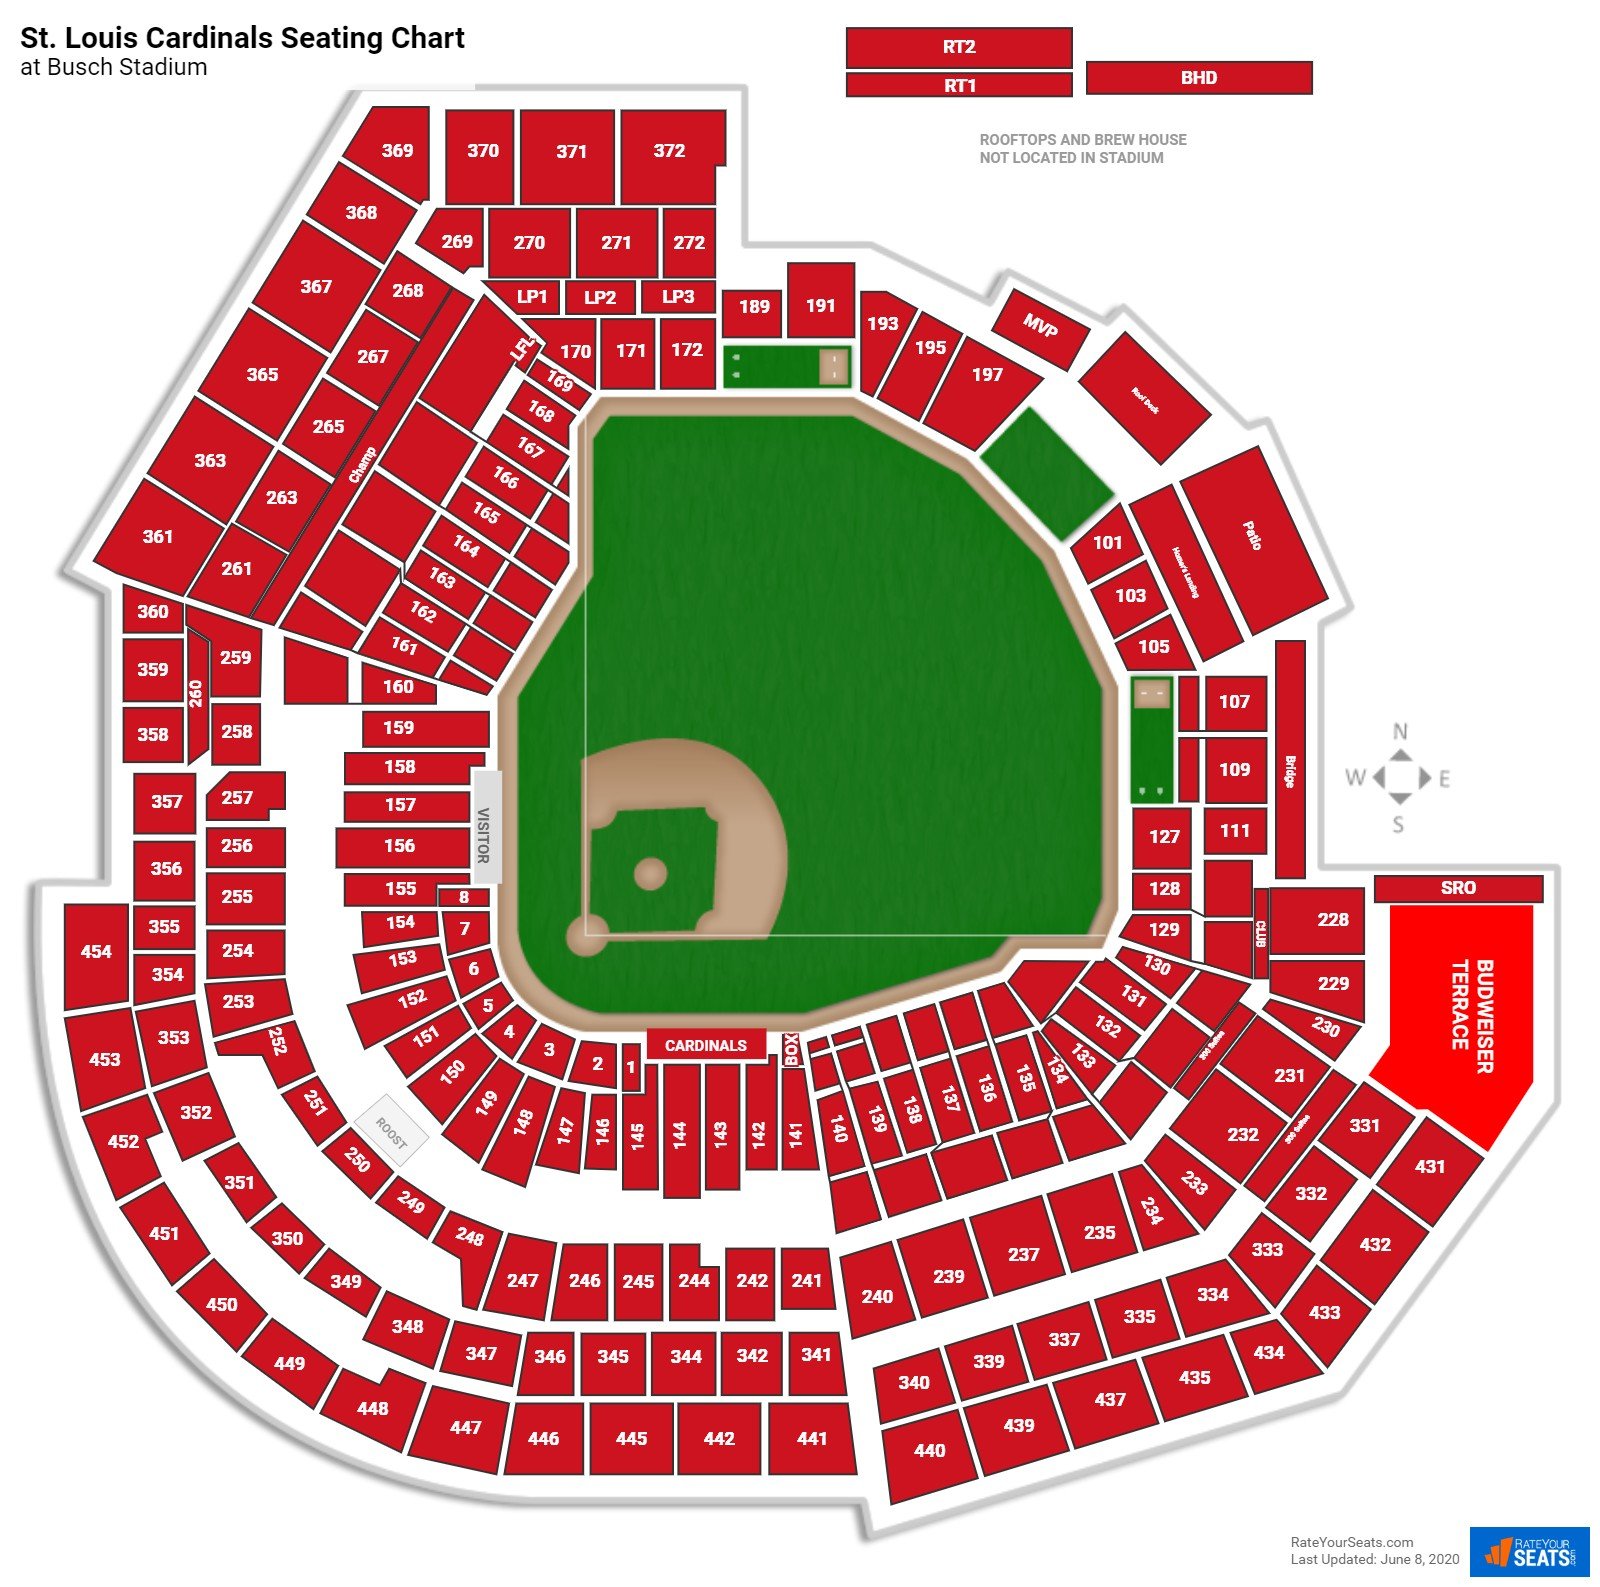 St Louis Cardinals Interactive Seating Chart | Review Home Decor